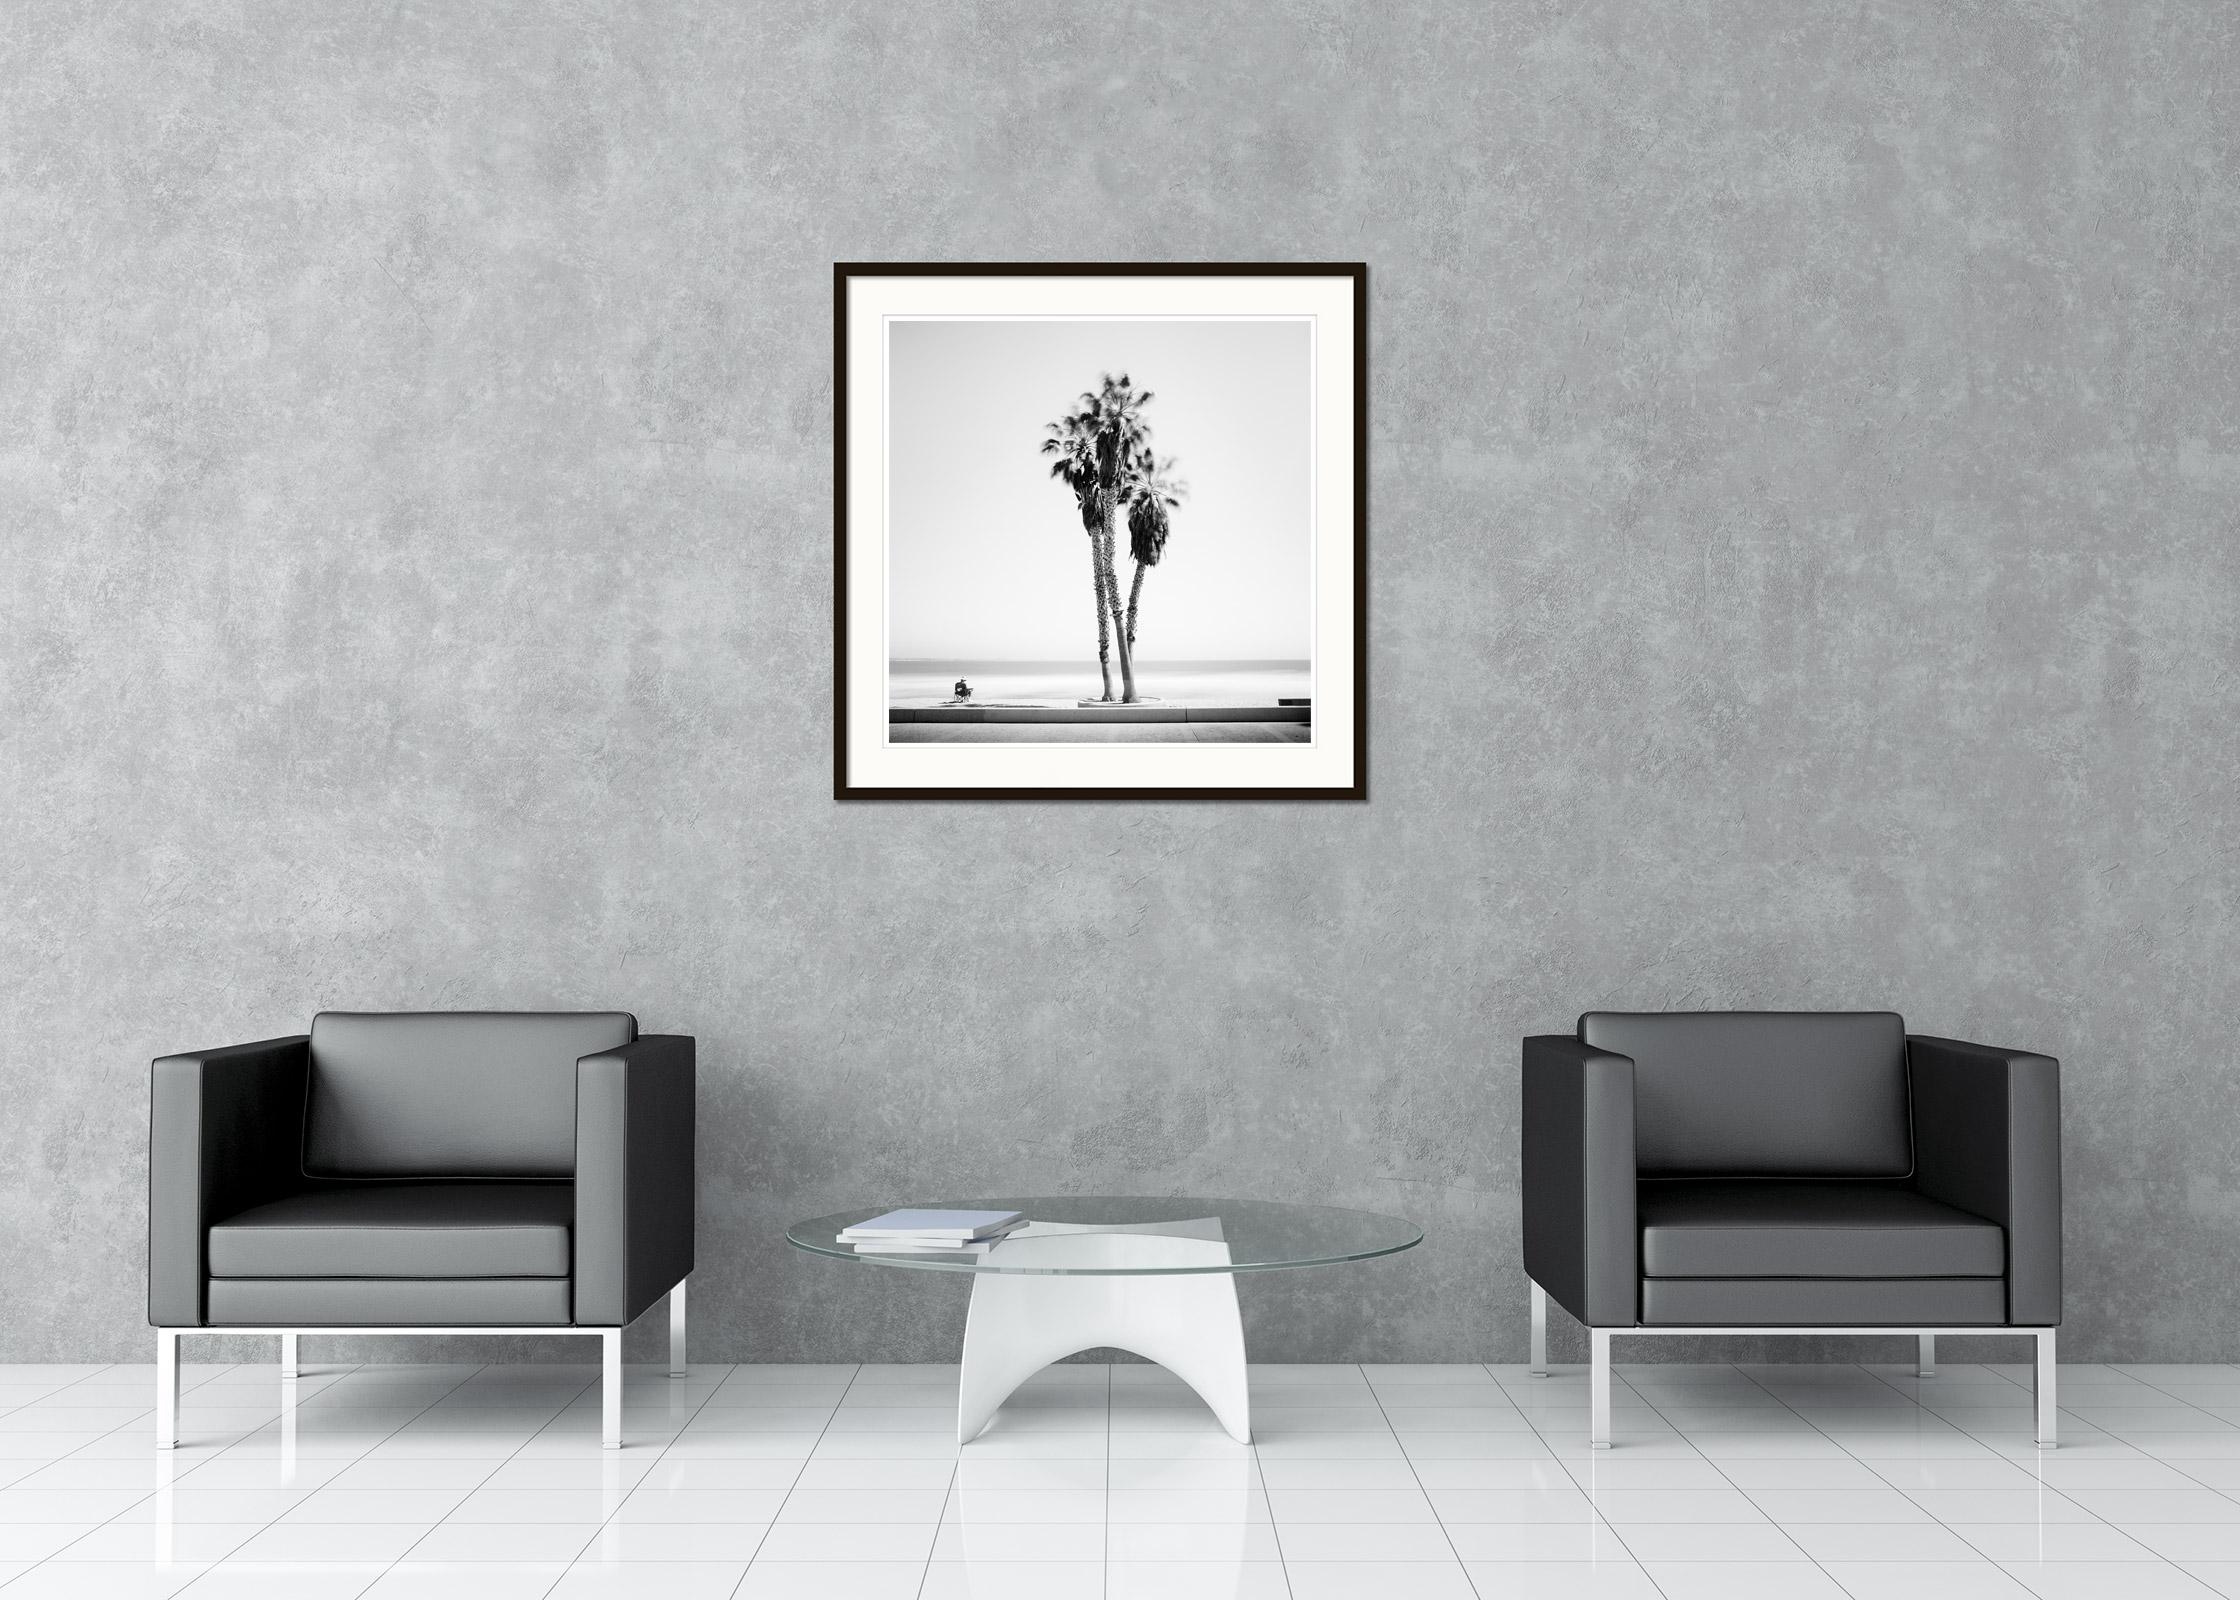 Black and white fine art landscape photography. Archival pigment ink print, edition of 15. Signed, titled, dated and numbered by artist. Certificate of authenticity included. Printed with 4cm white border.
International award winner photographer -